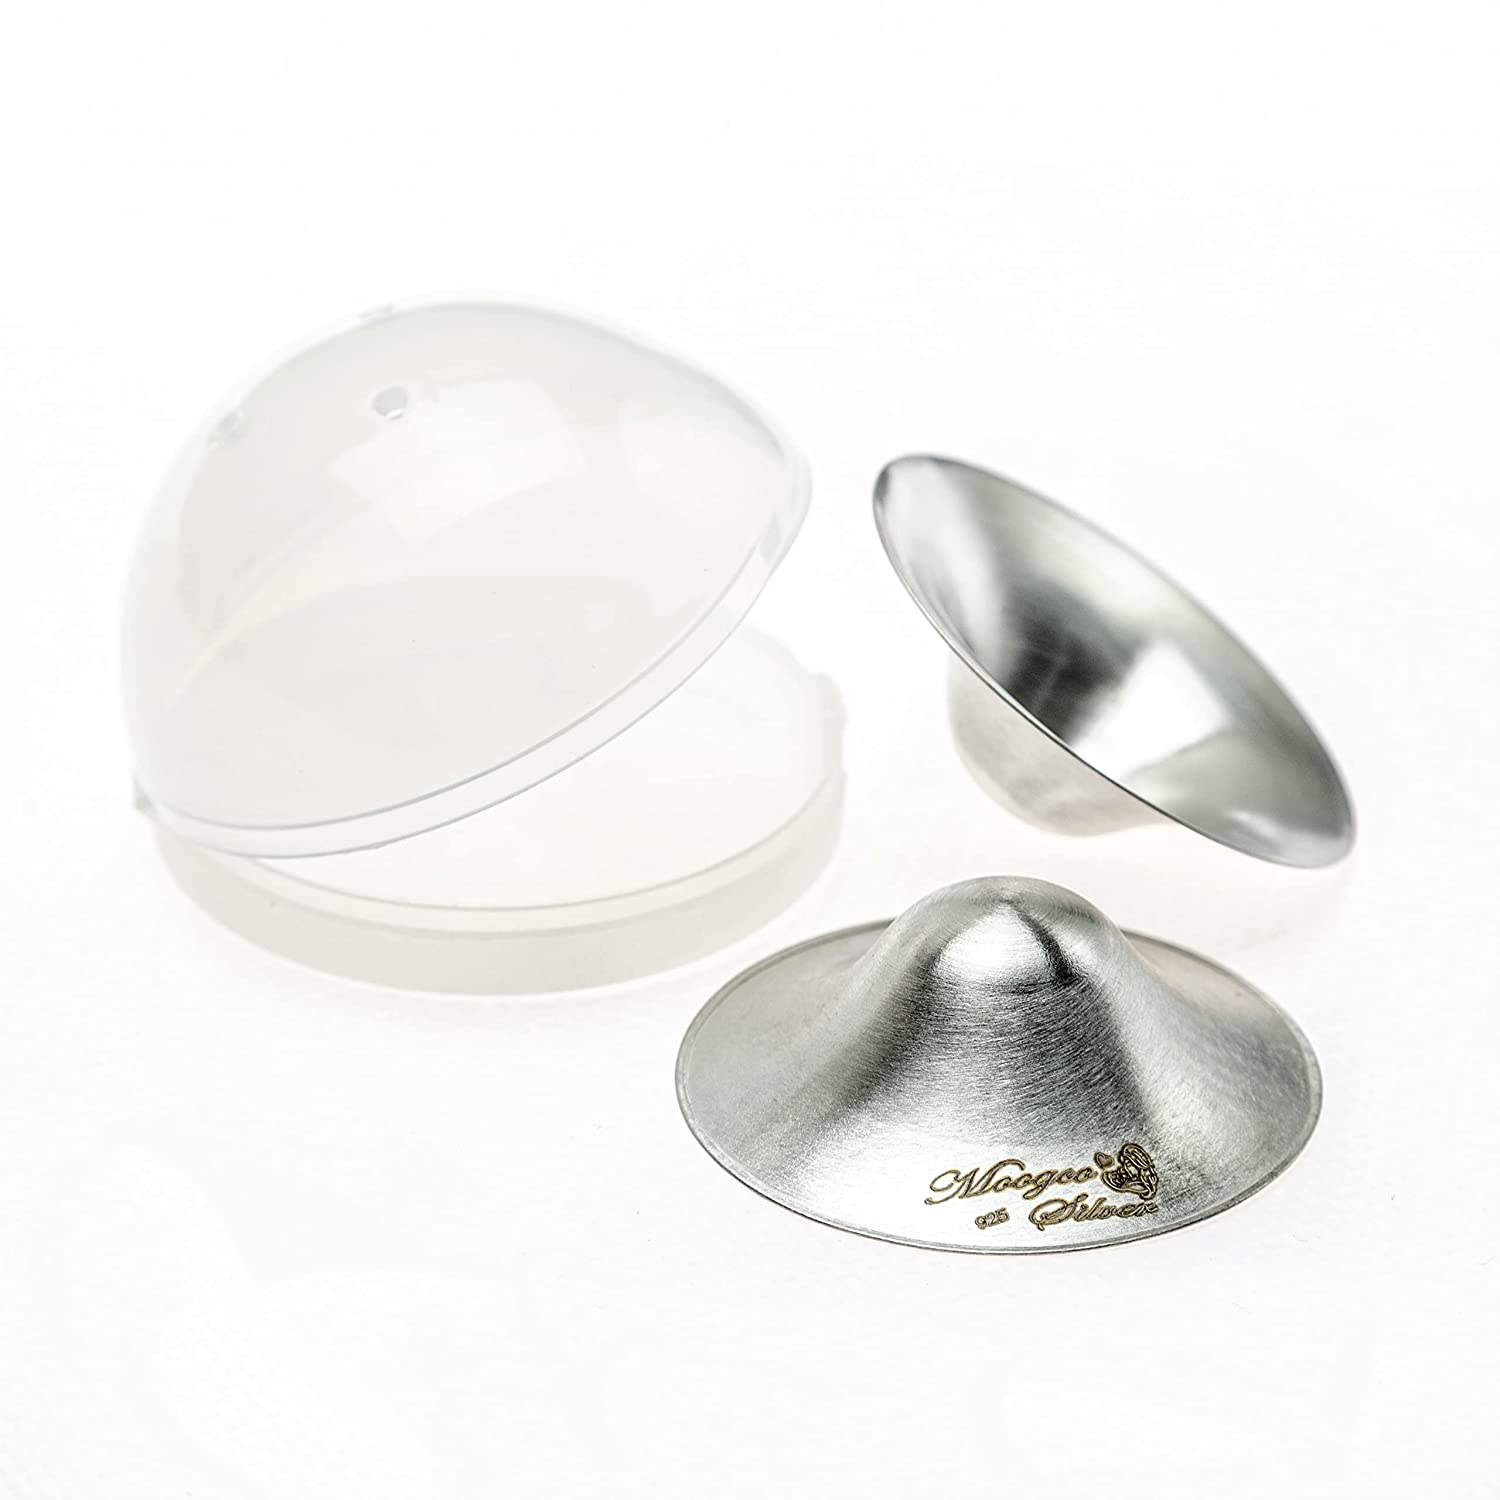 SILVERETTE The Original Silver Nursing Cups, Silverettes Metal Nipple Covers  for Breastfeeding, Nursing Shield, 925 Silver Nipple Cover Guards, Soothe  and Protect Sore Nipples -Made in Italy Regular 